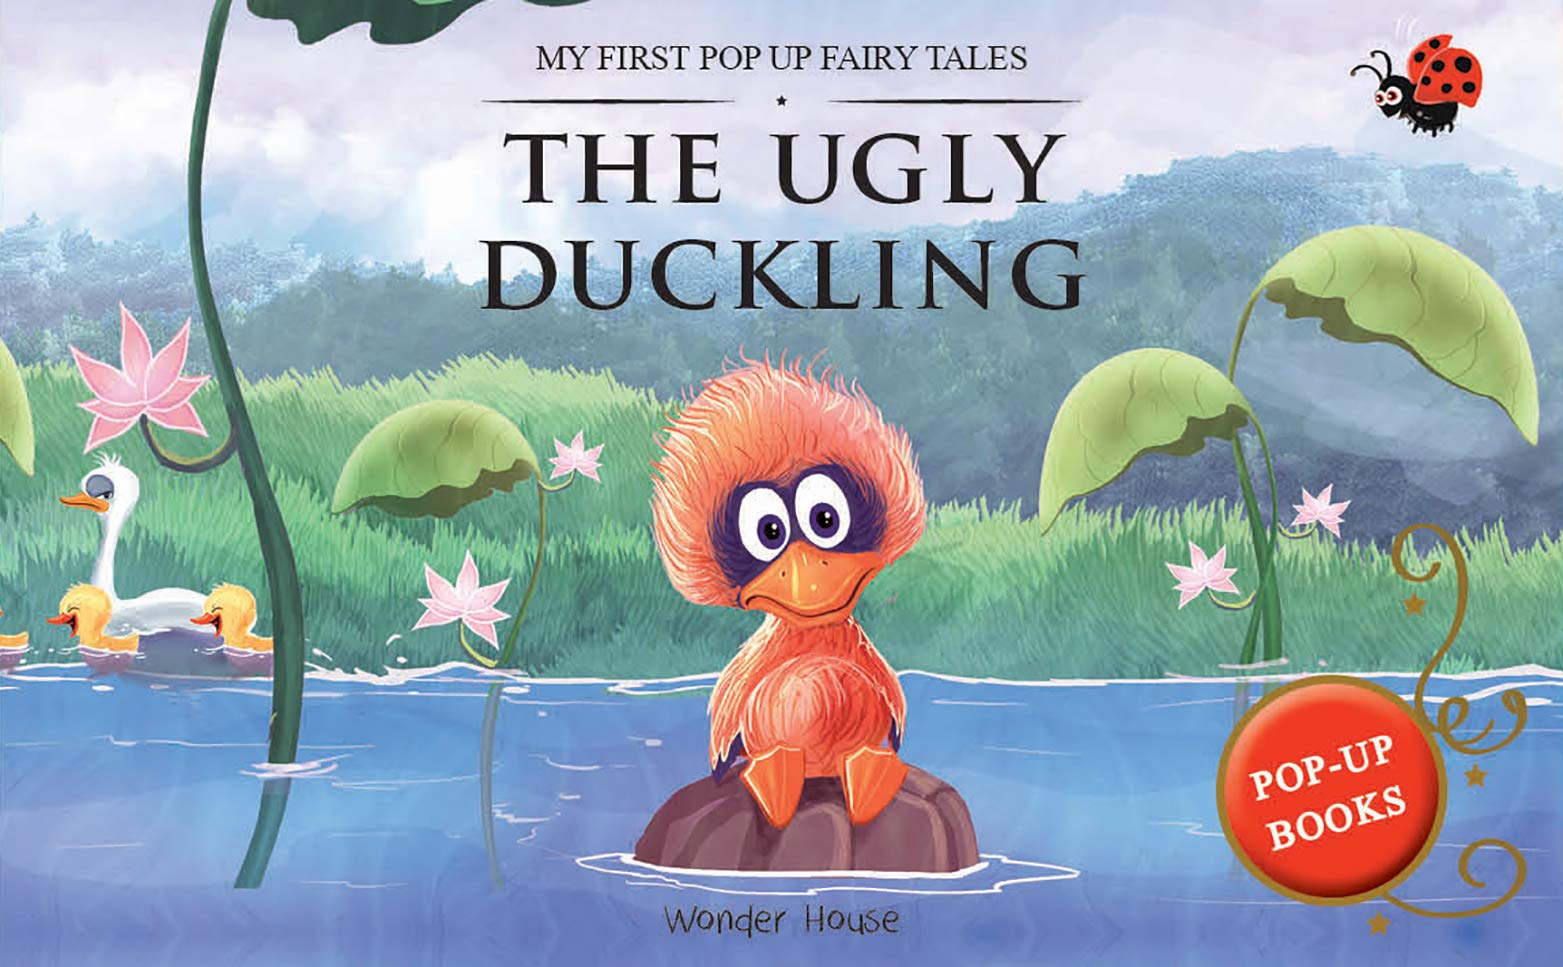 My First Pop Up Fairy Tales - The Ugly Duckling